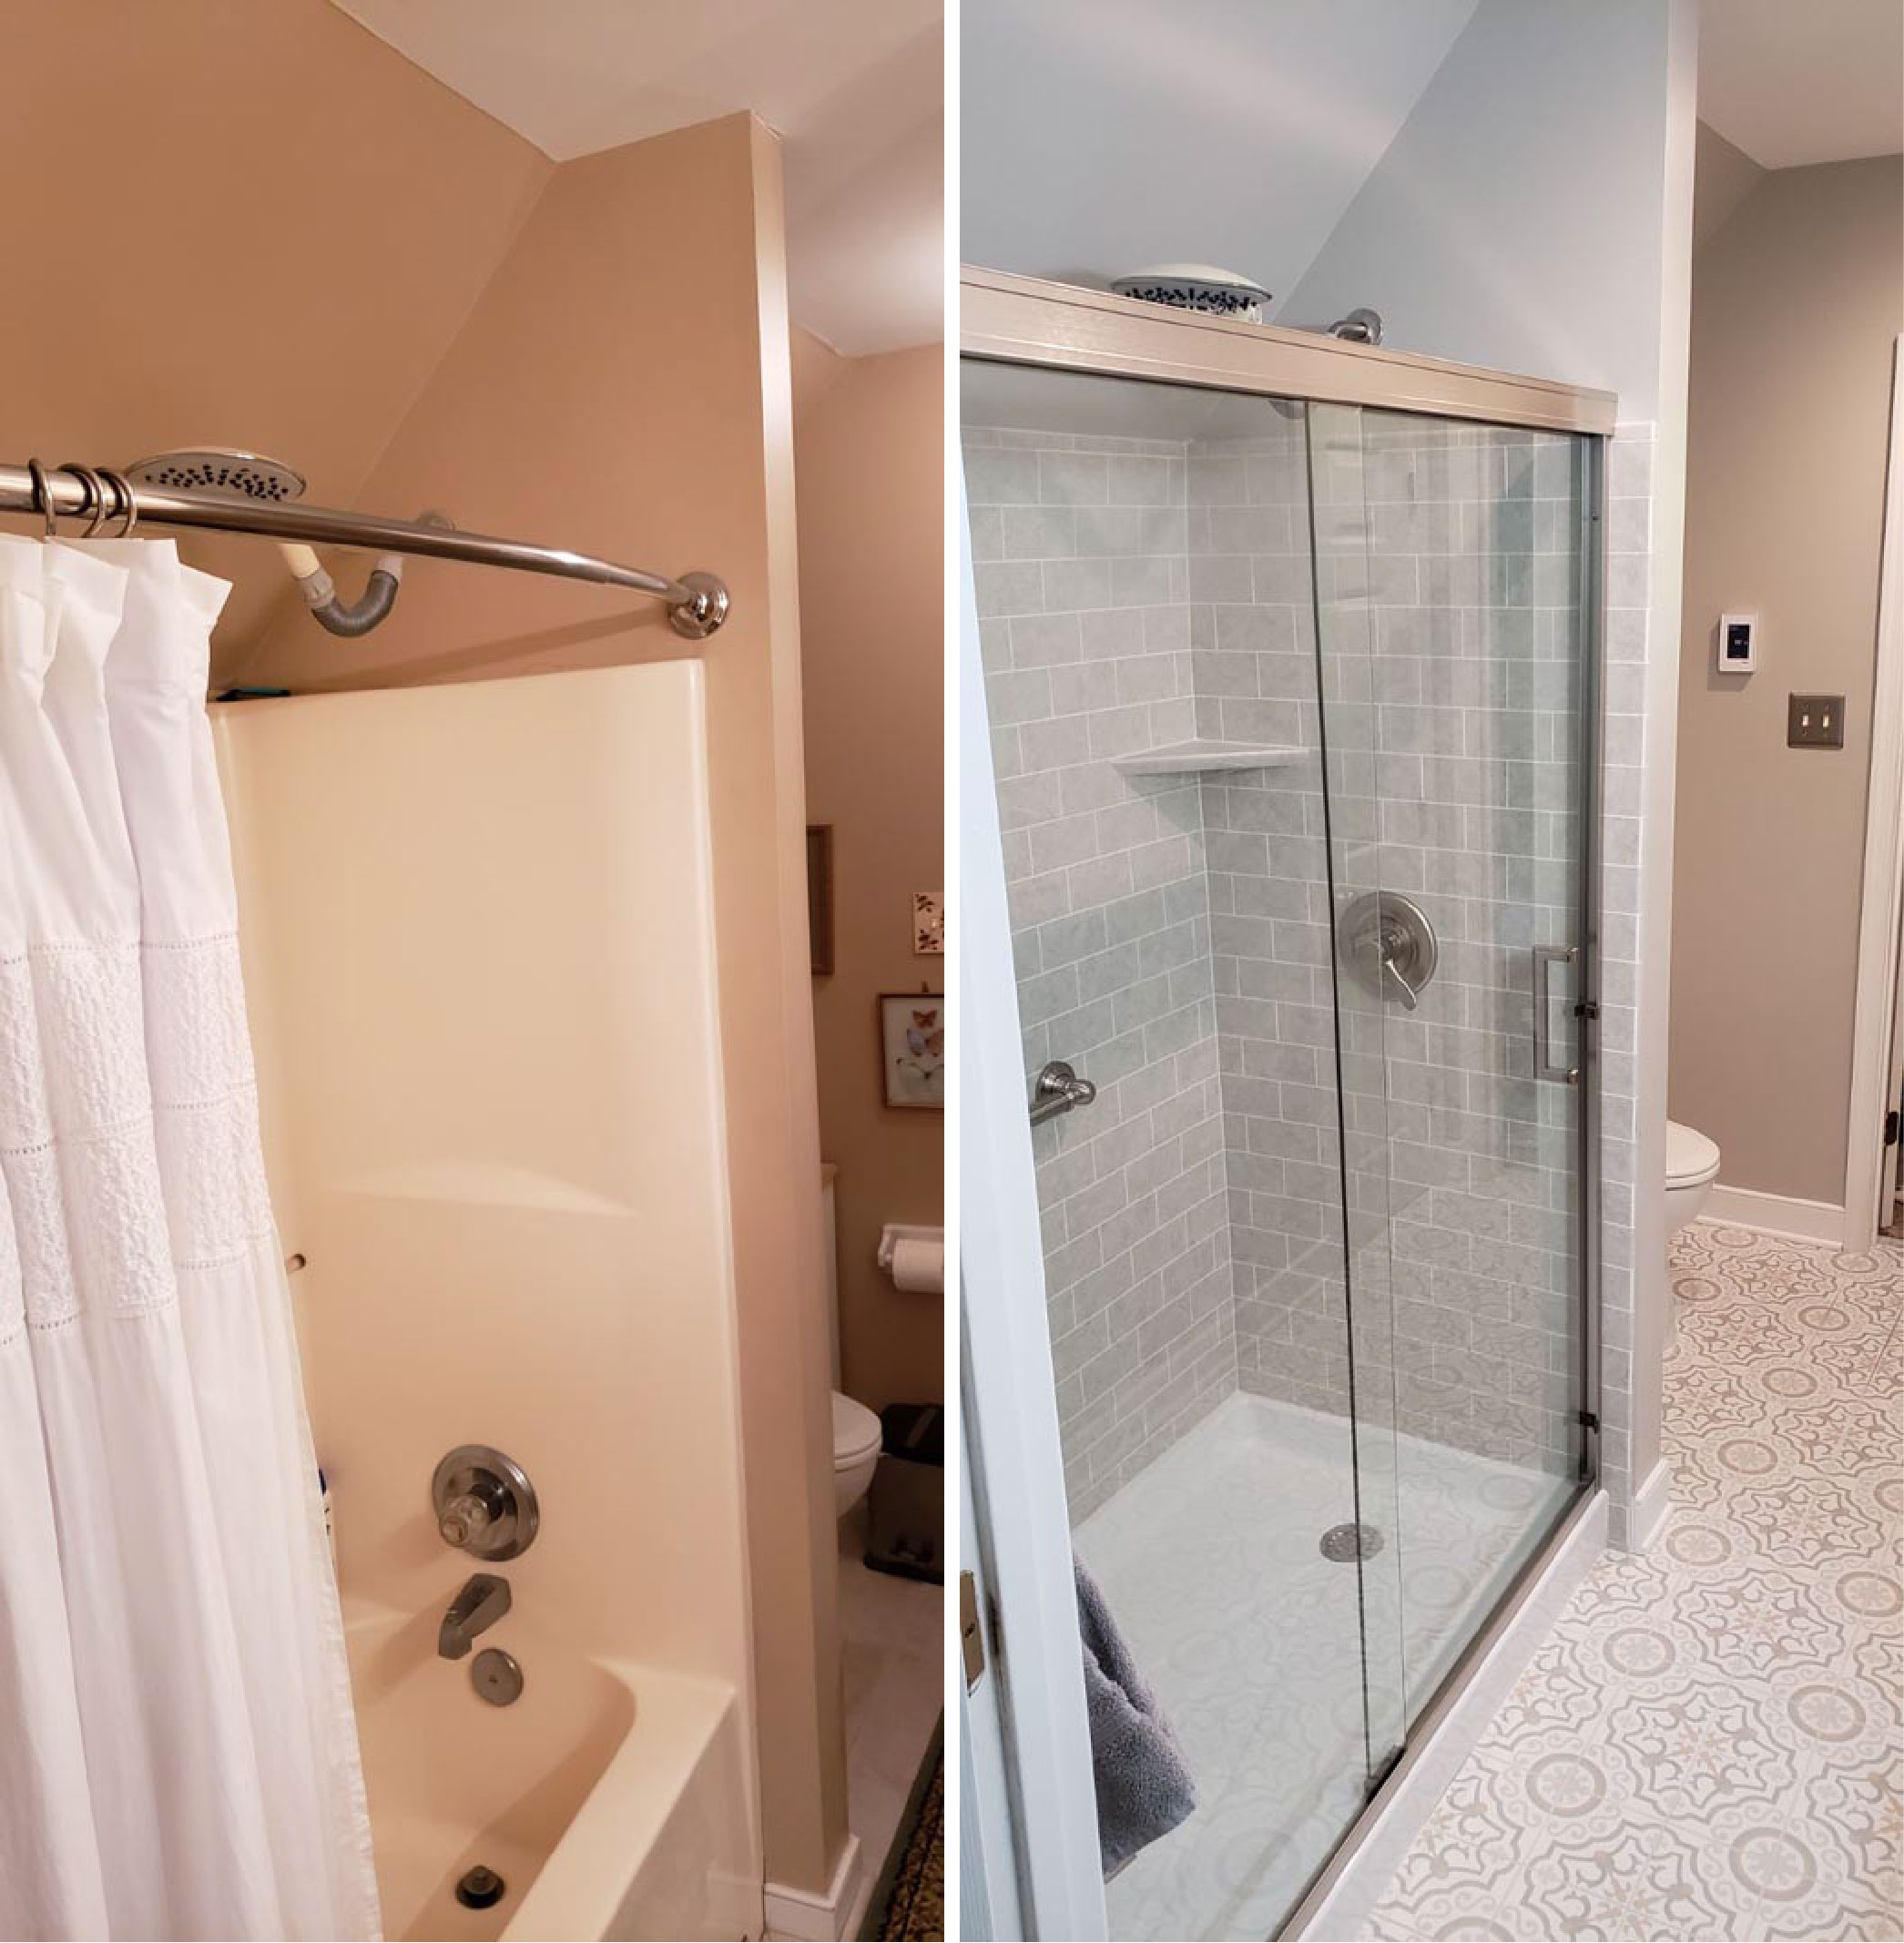 Costs Of Installing A Walk In Shower, How Much Does It Cost To Remove A Bathtub And Install Walk In Shower